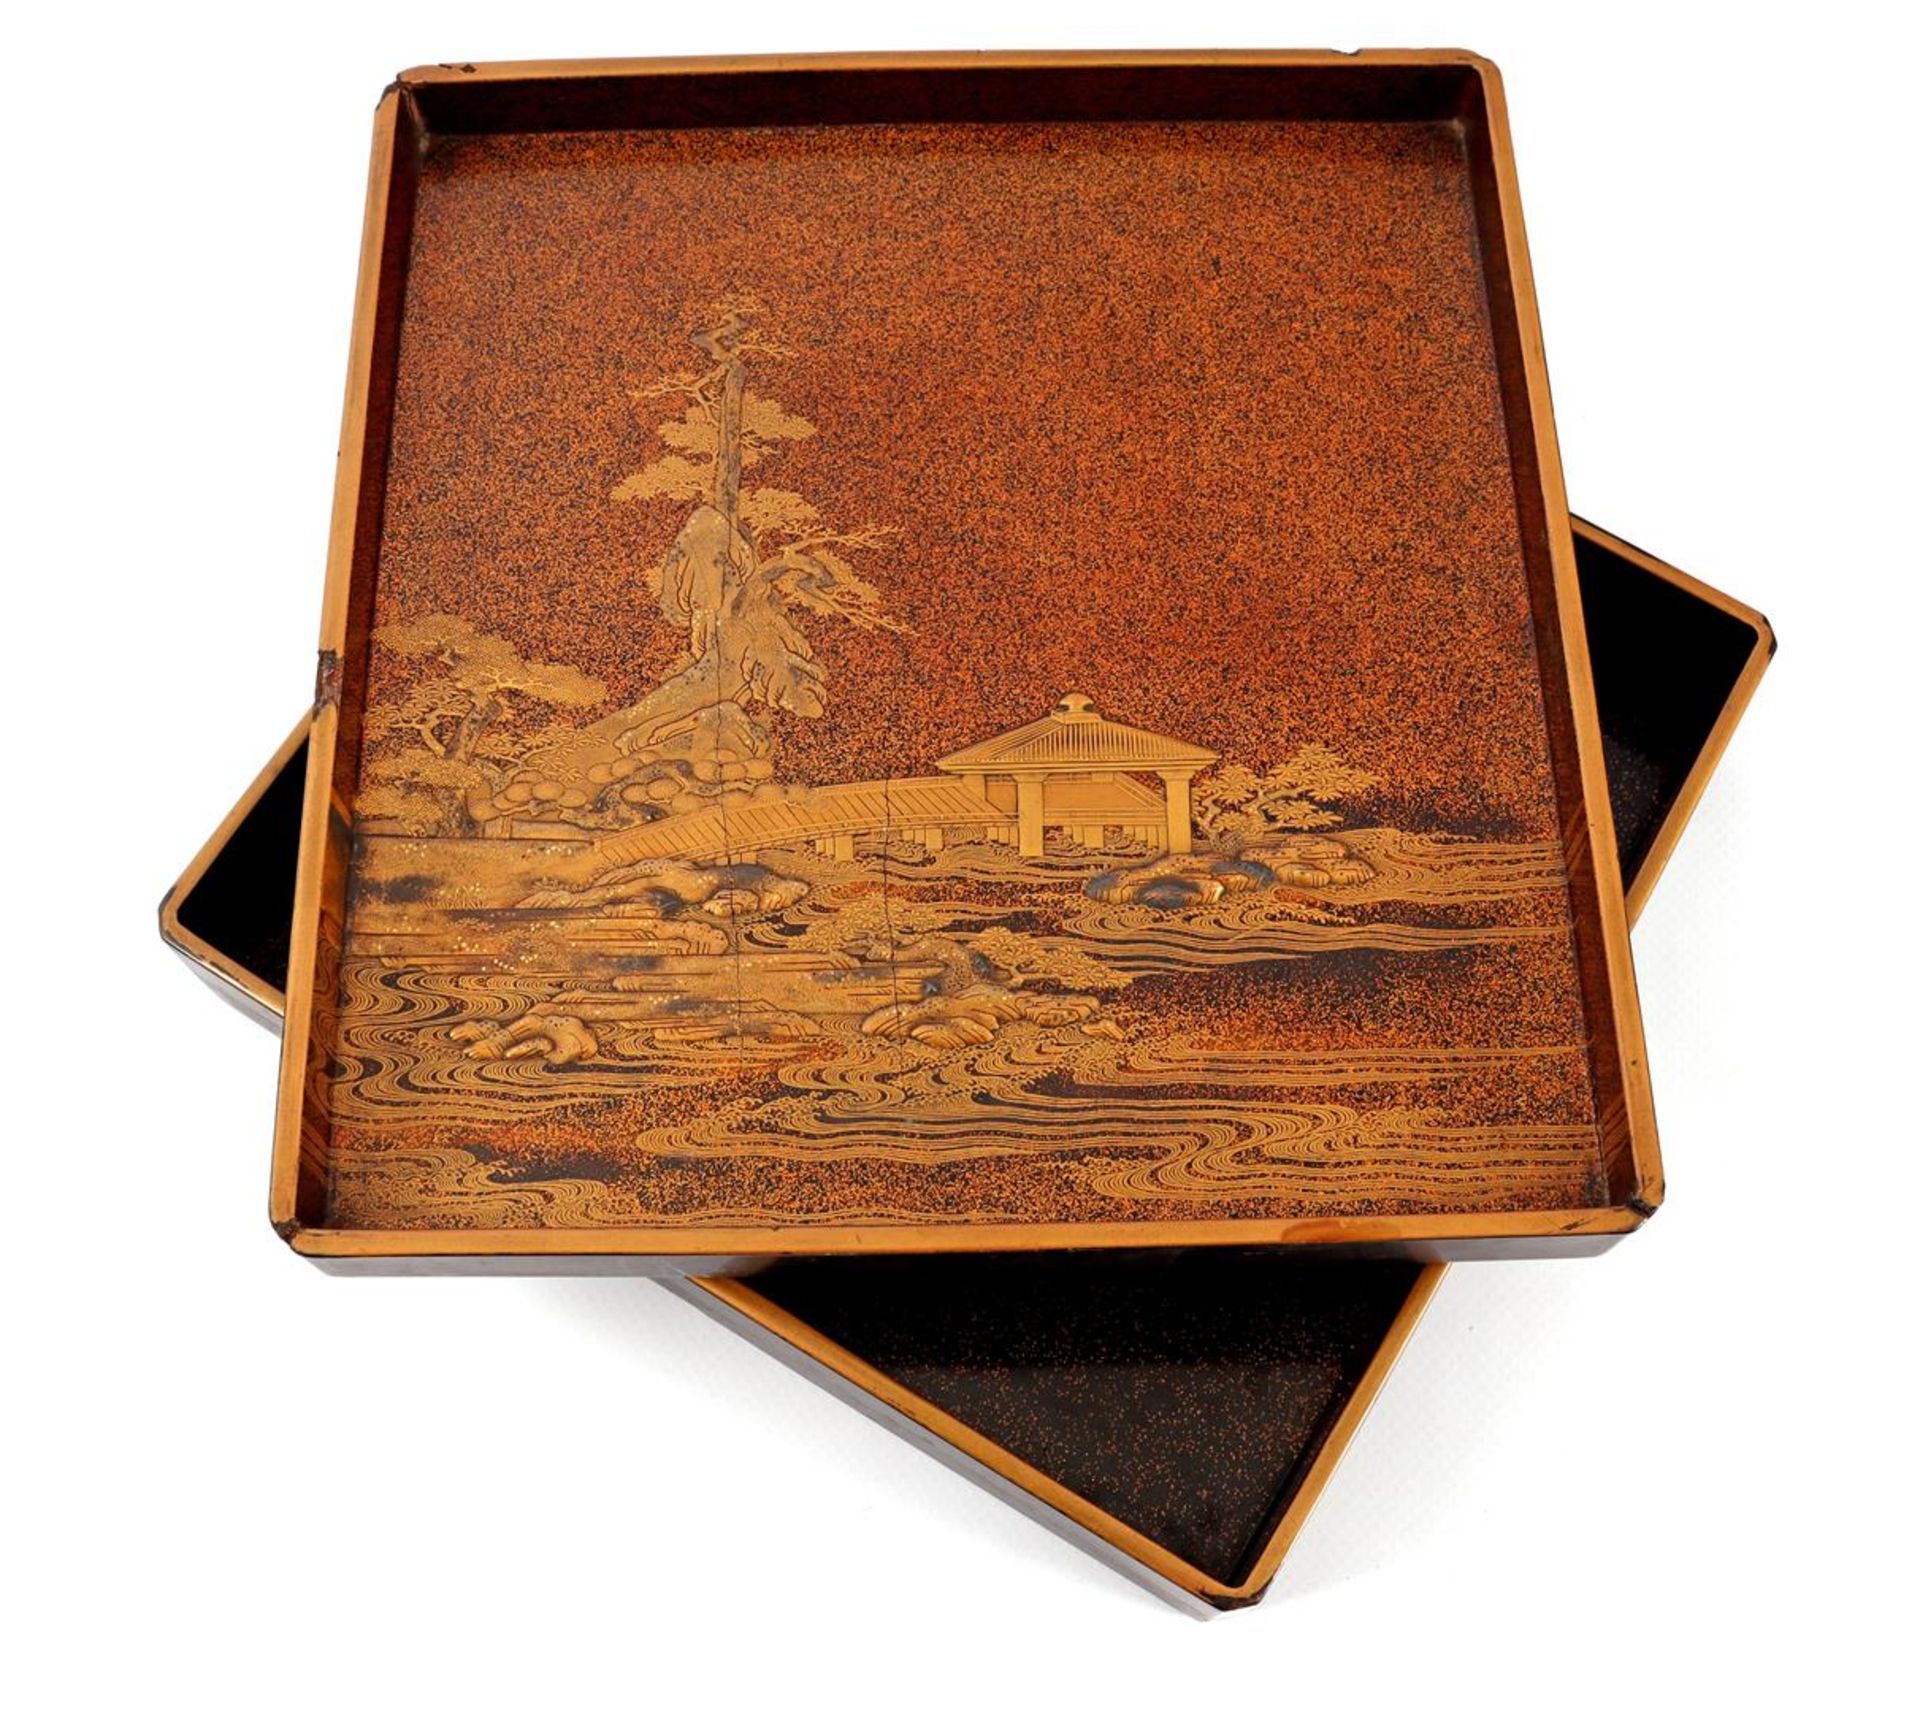 Chinese lacquer box with decoration in gold leaf - Image 2 of 4